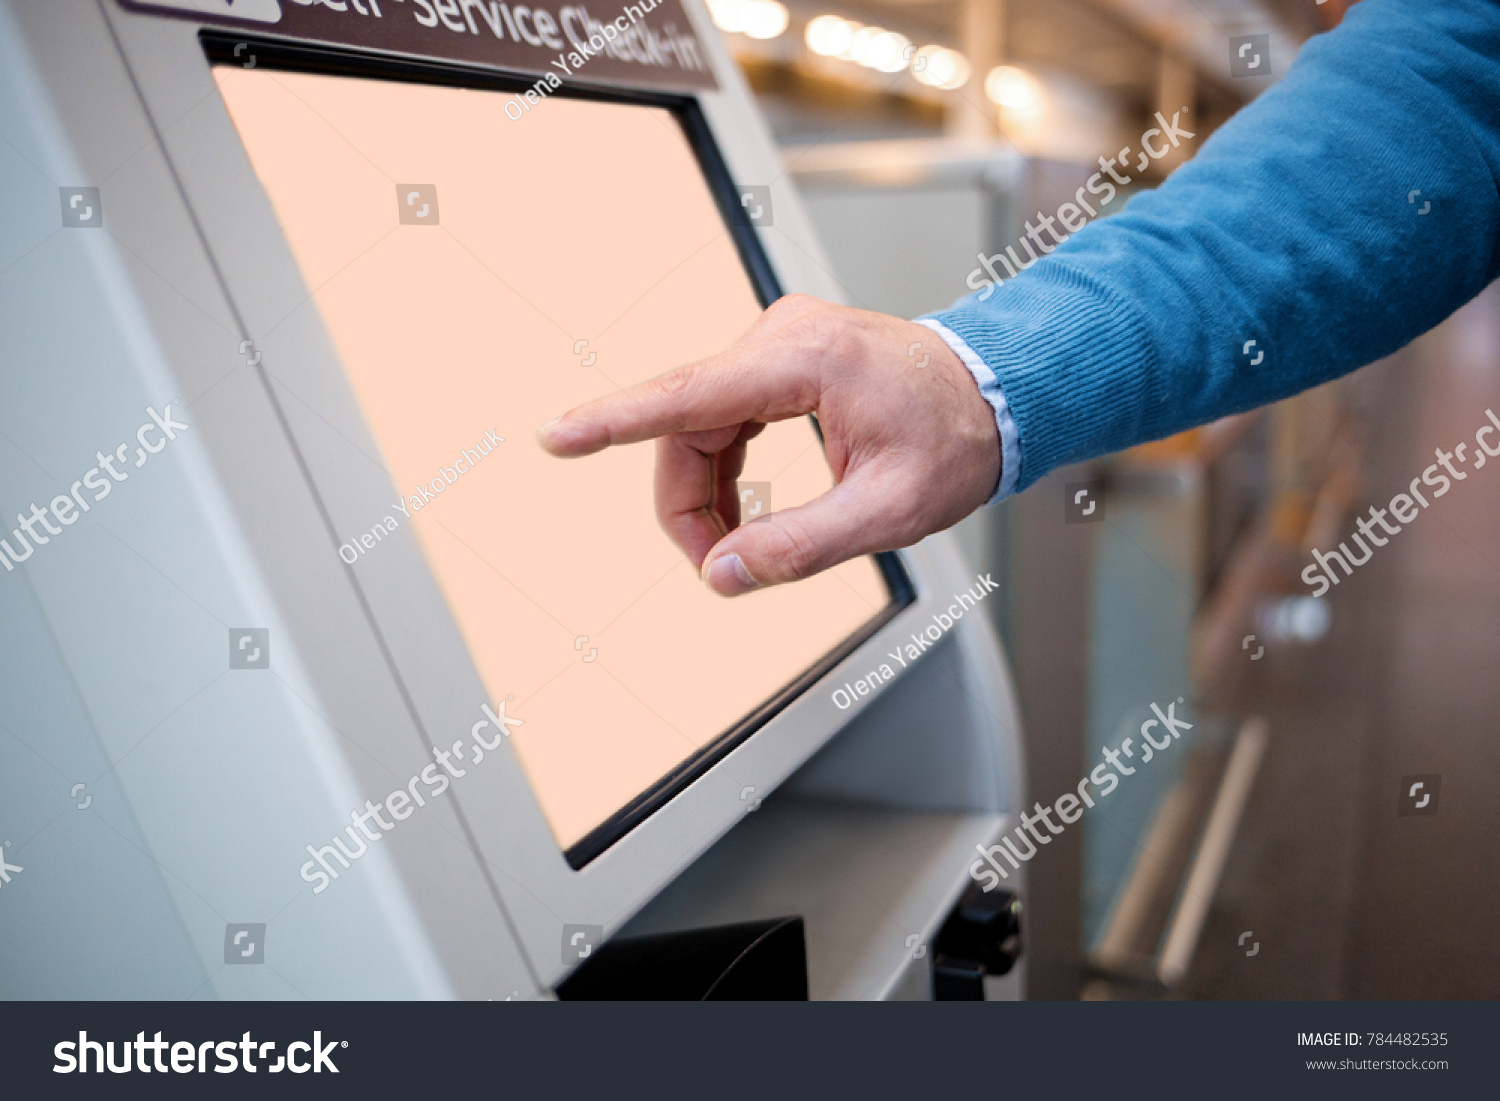 Confirm flight details. Close-up of male hands is using self-service check-in kiosk while standing at international airport building. He is registering on his airplane #784482535